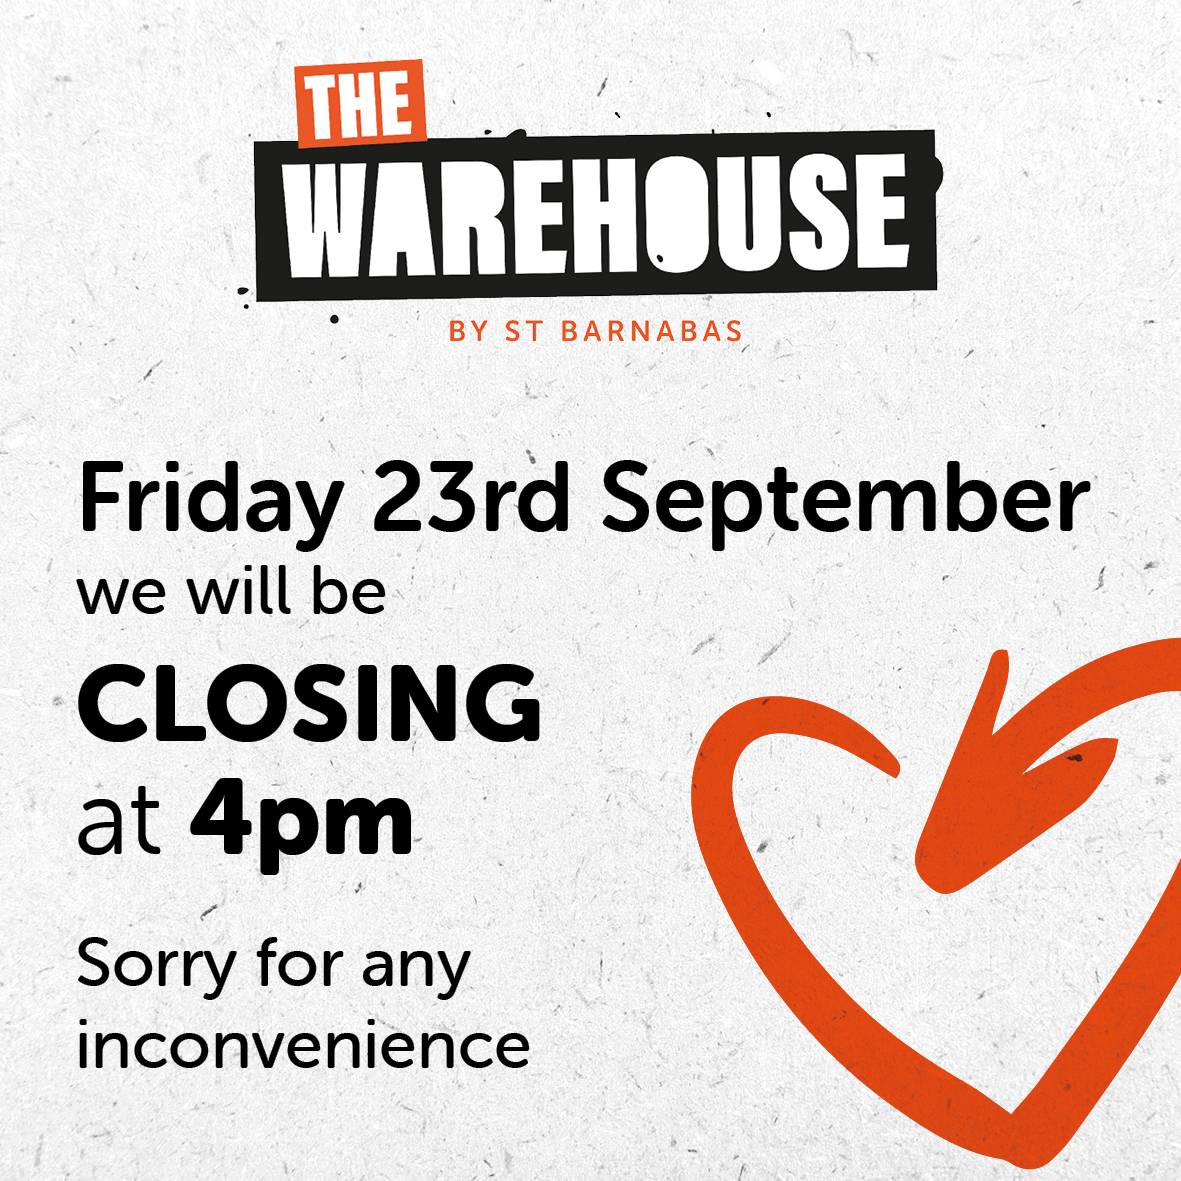 White background, black and red logo of The Warehouse at the top with black text "Friday 23rd September we will be closing at 4pm sorry for any inconvenience" with red heart illustration